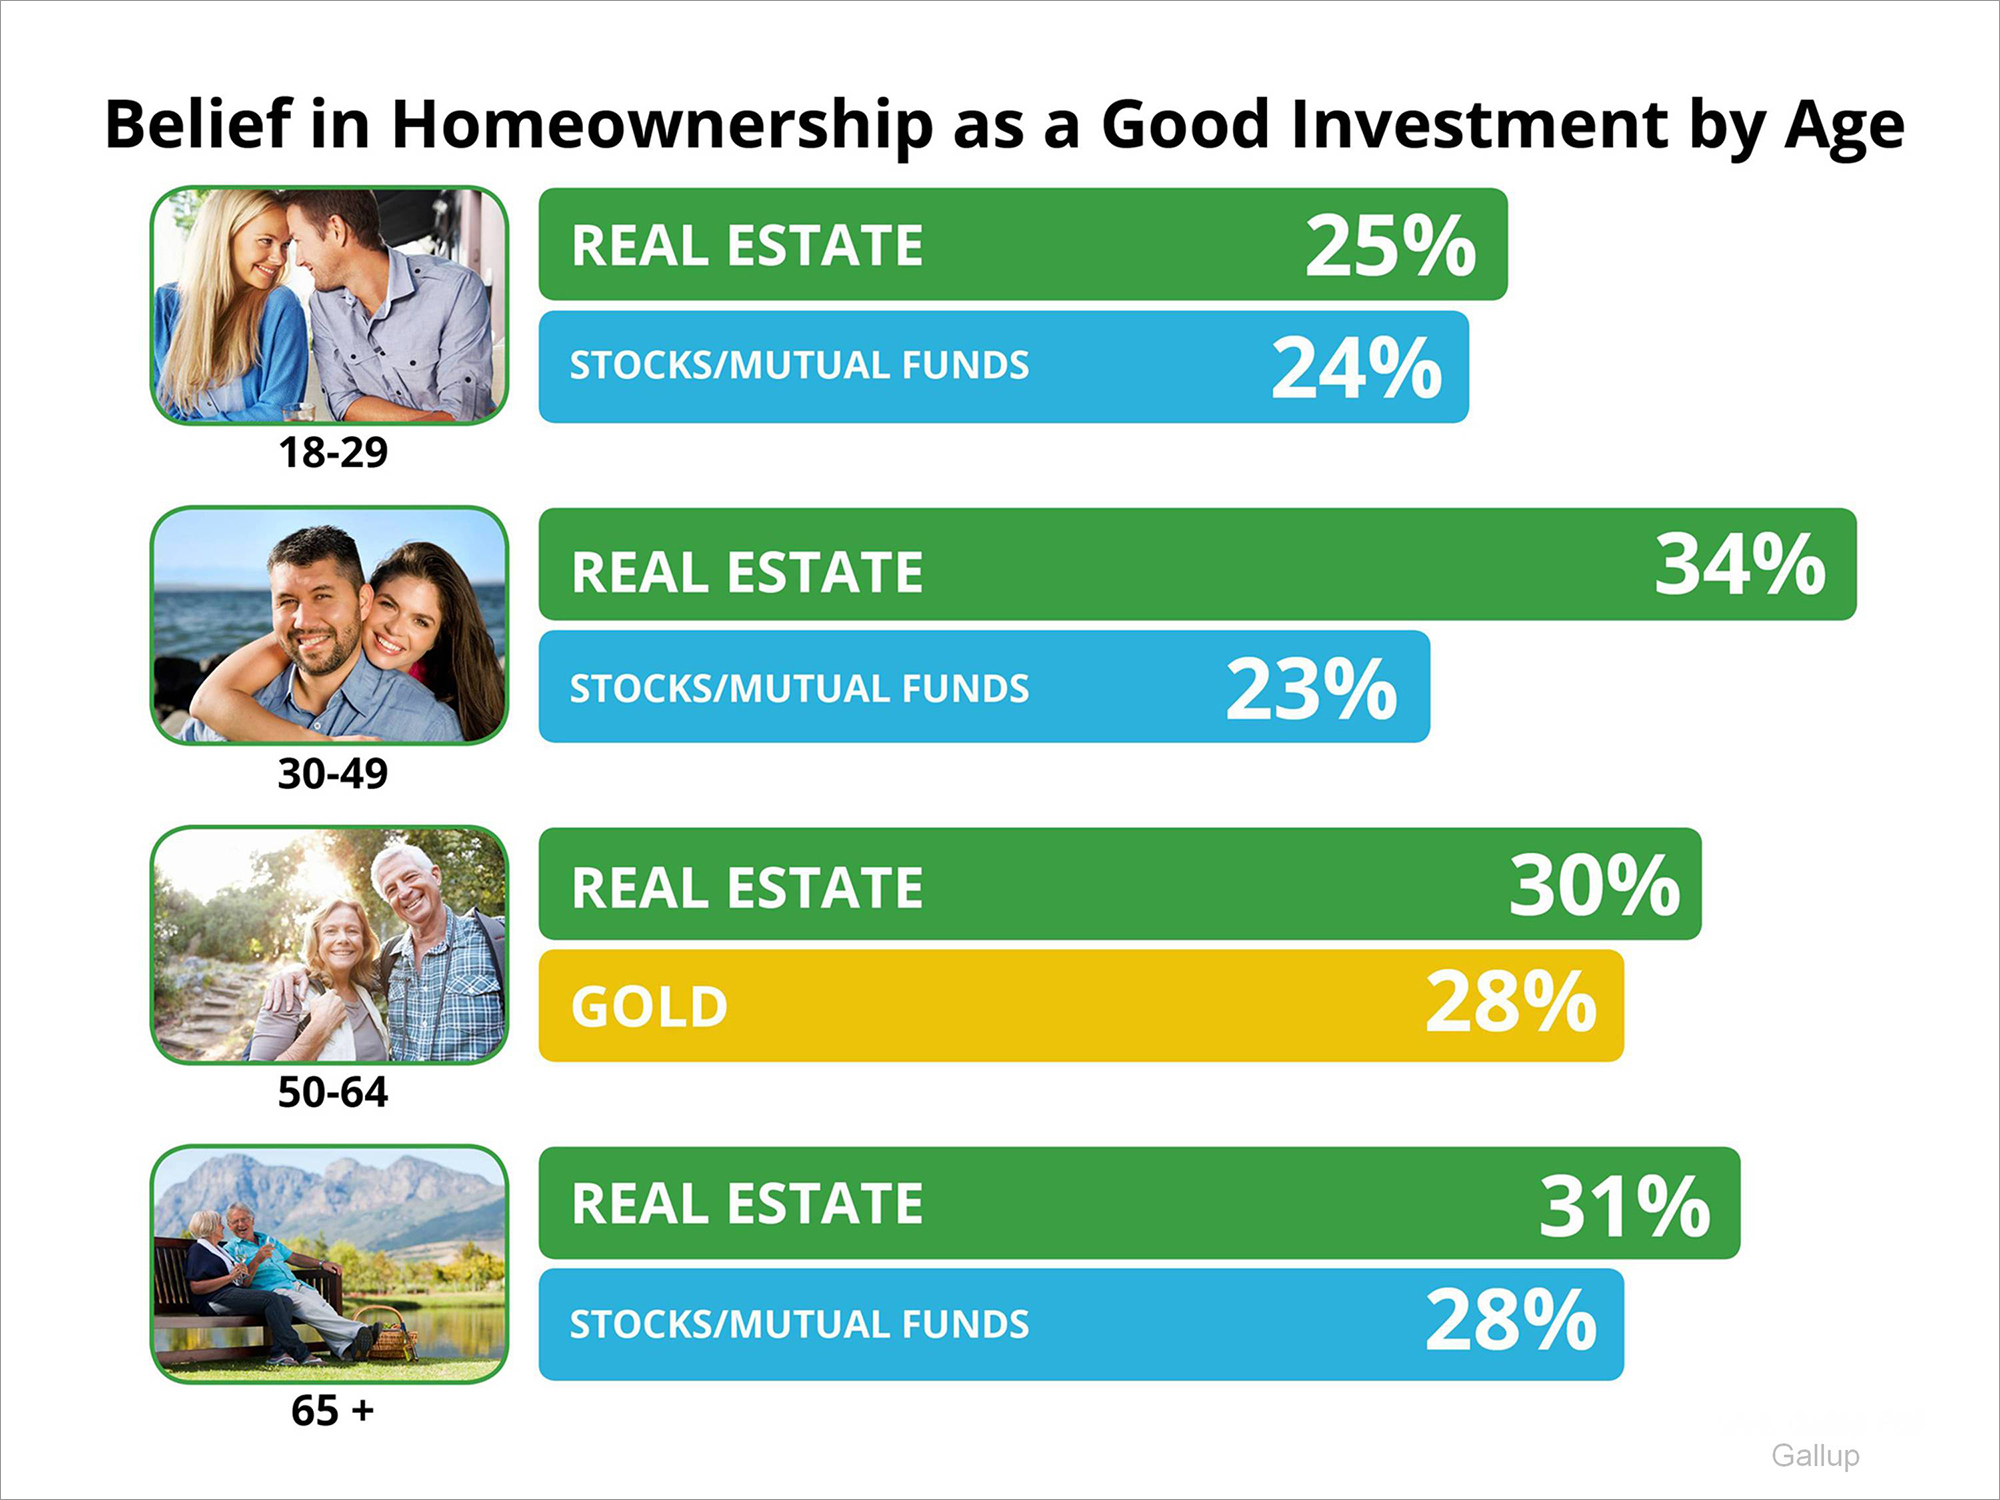 Gallup Poll: Real Estate Best Long-Term Investment | Keeping Current Matters